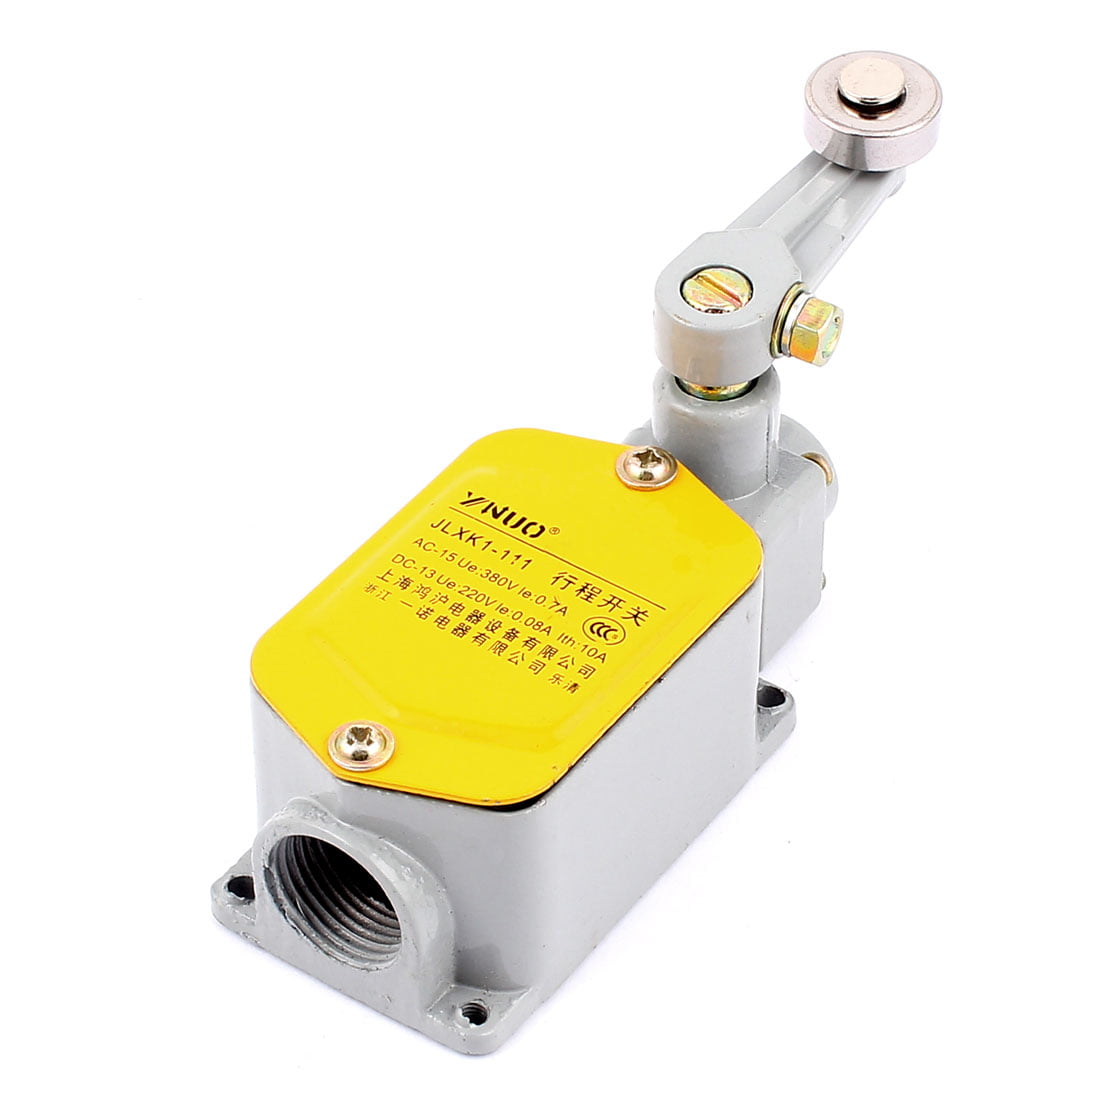 Left Right Rotary Roller Lever Arm Actuator Momentary Limit Switch 